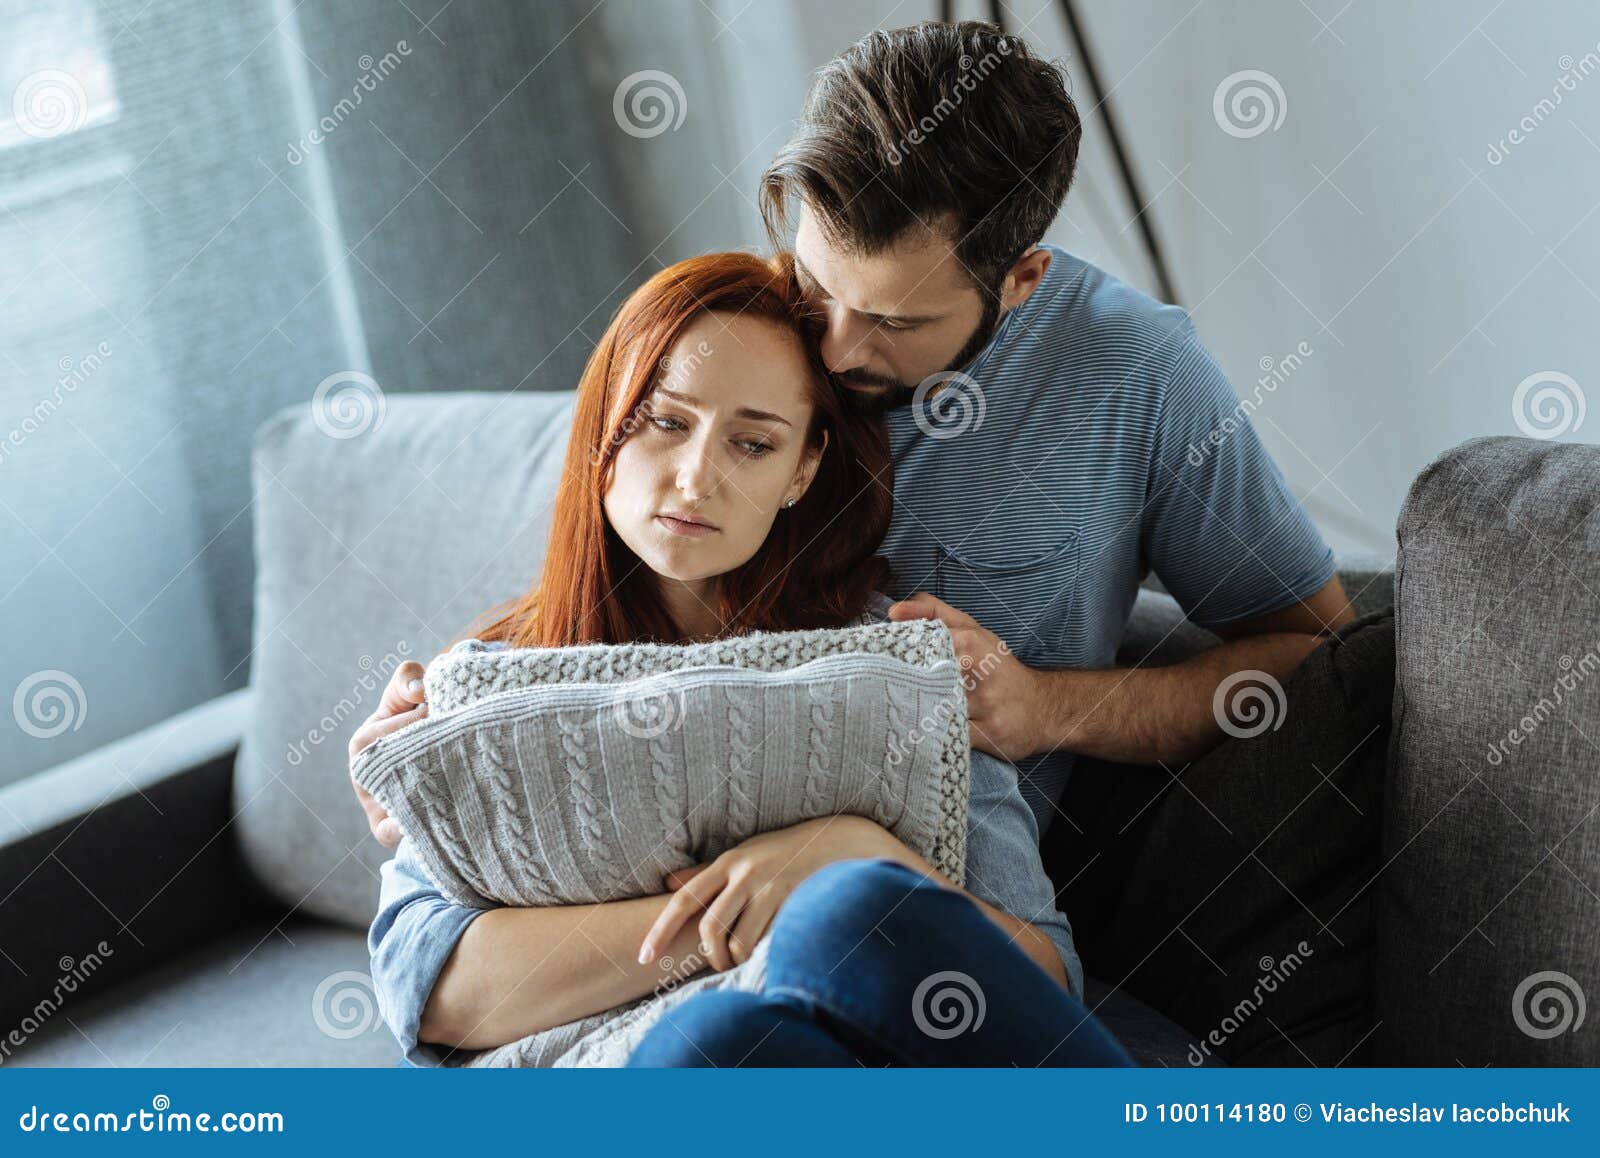 Handsome Caring Man Hugging His Girlfriend Stock Photo - Image of ...